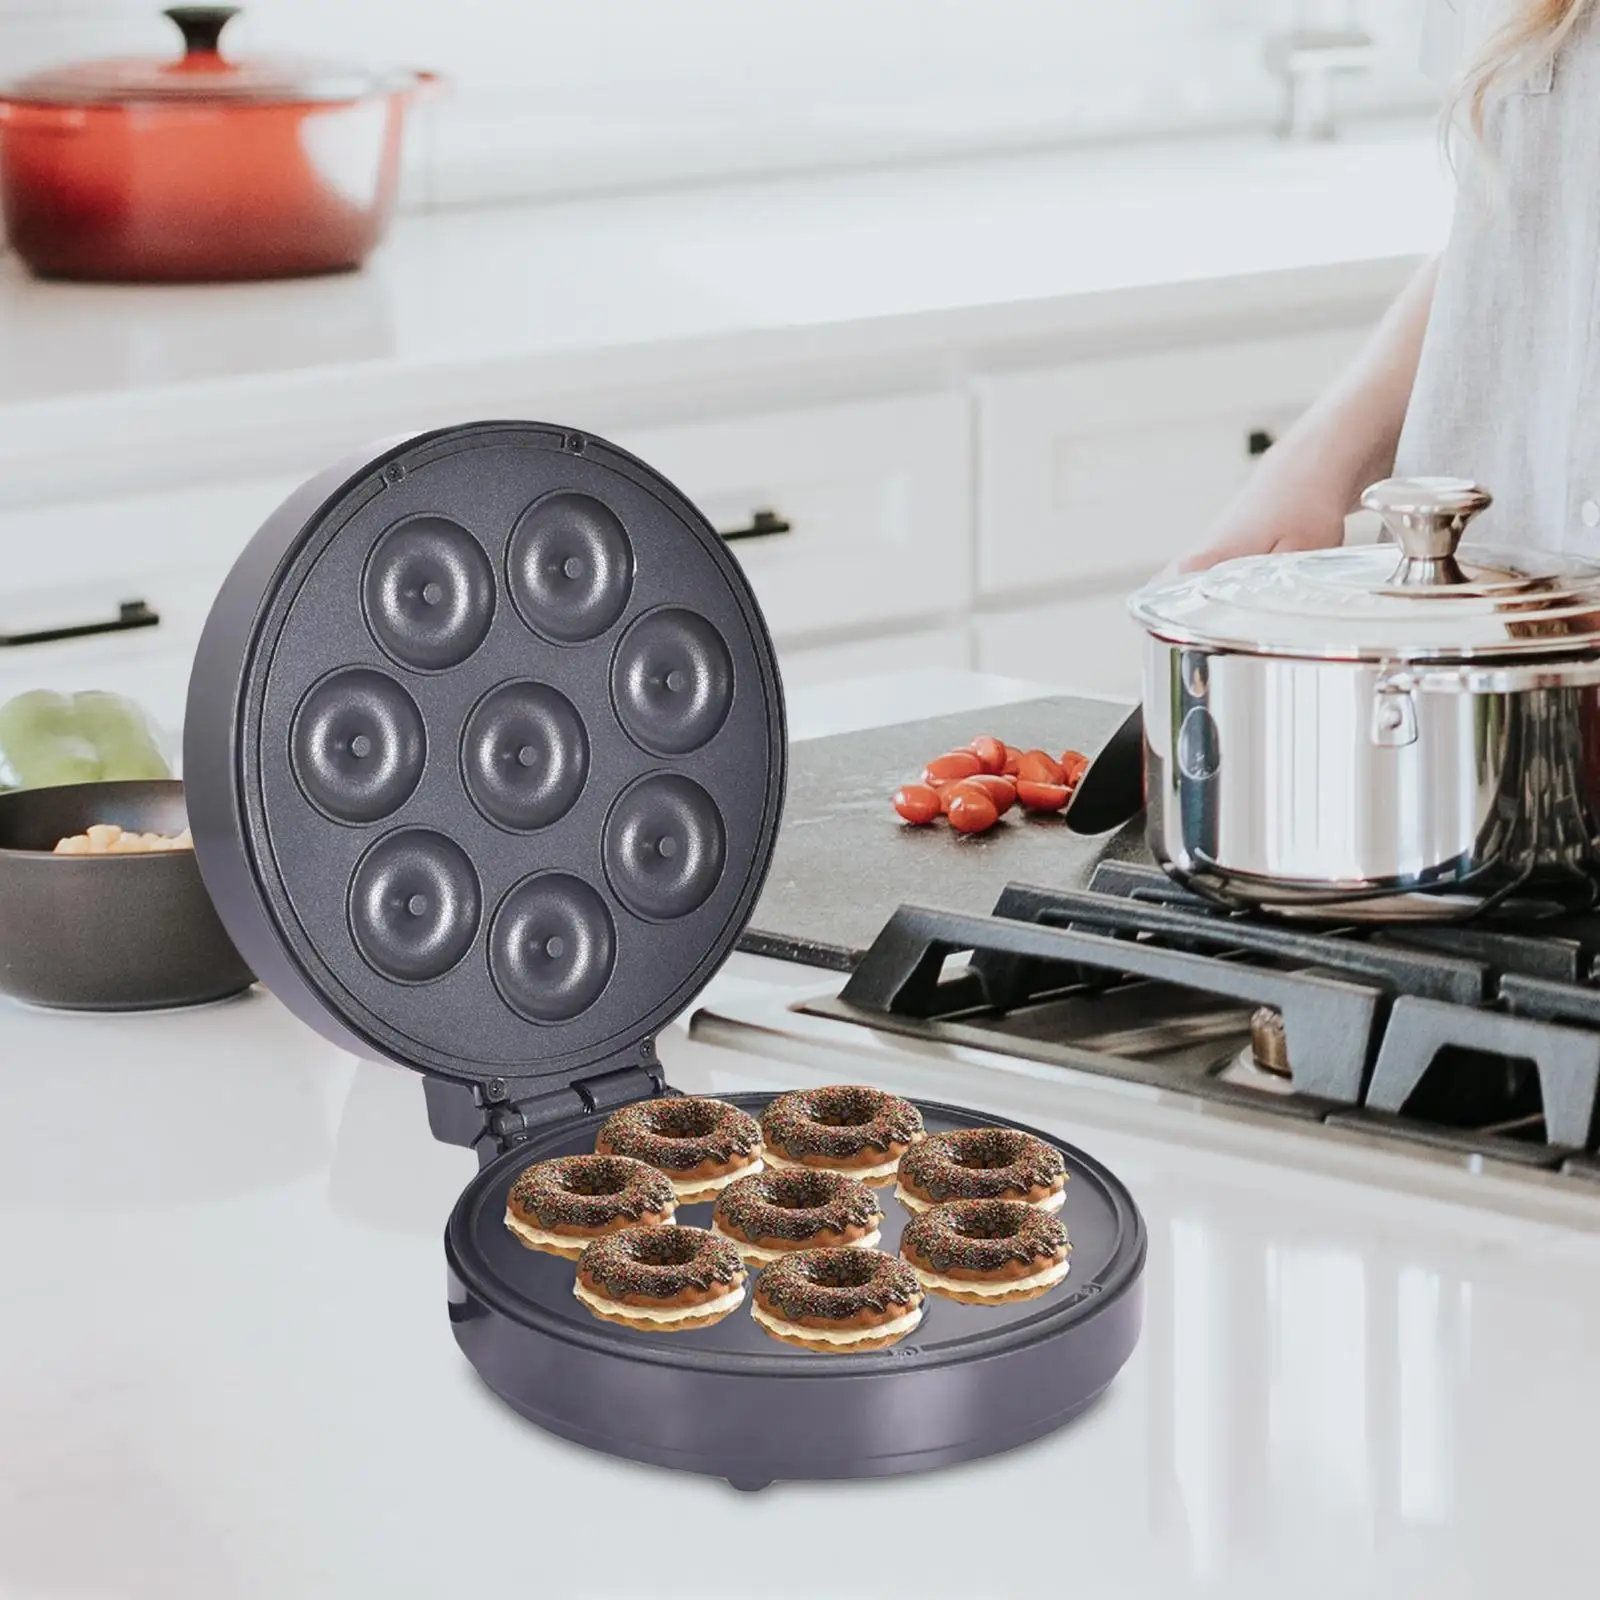 Donut Maker Nonstick with Reminder Light Kid Friendly Desserts Makes 8 Small Doughnuts Household Cake Machine for Commercial Use